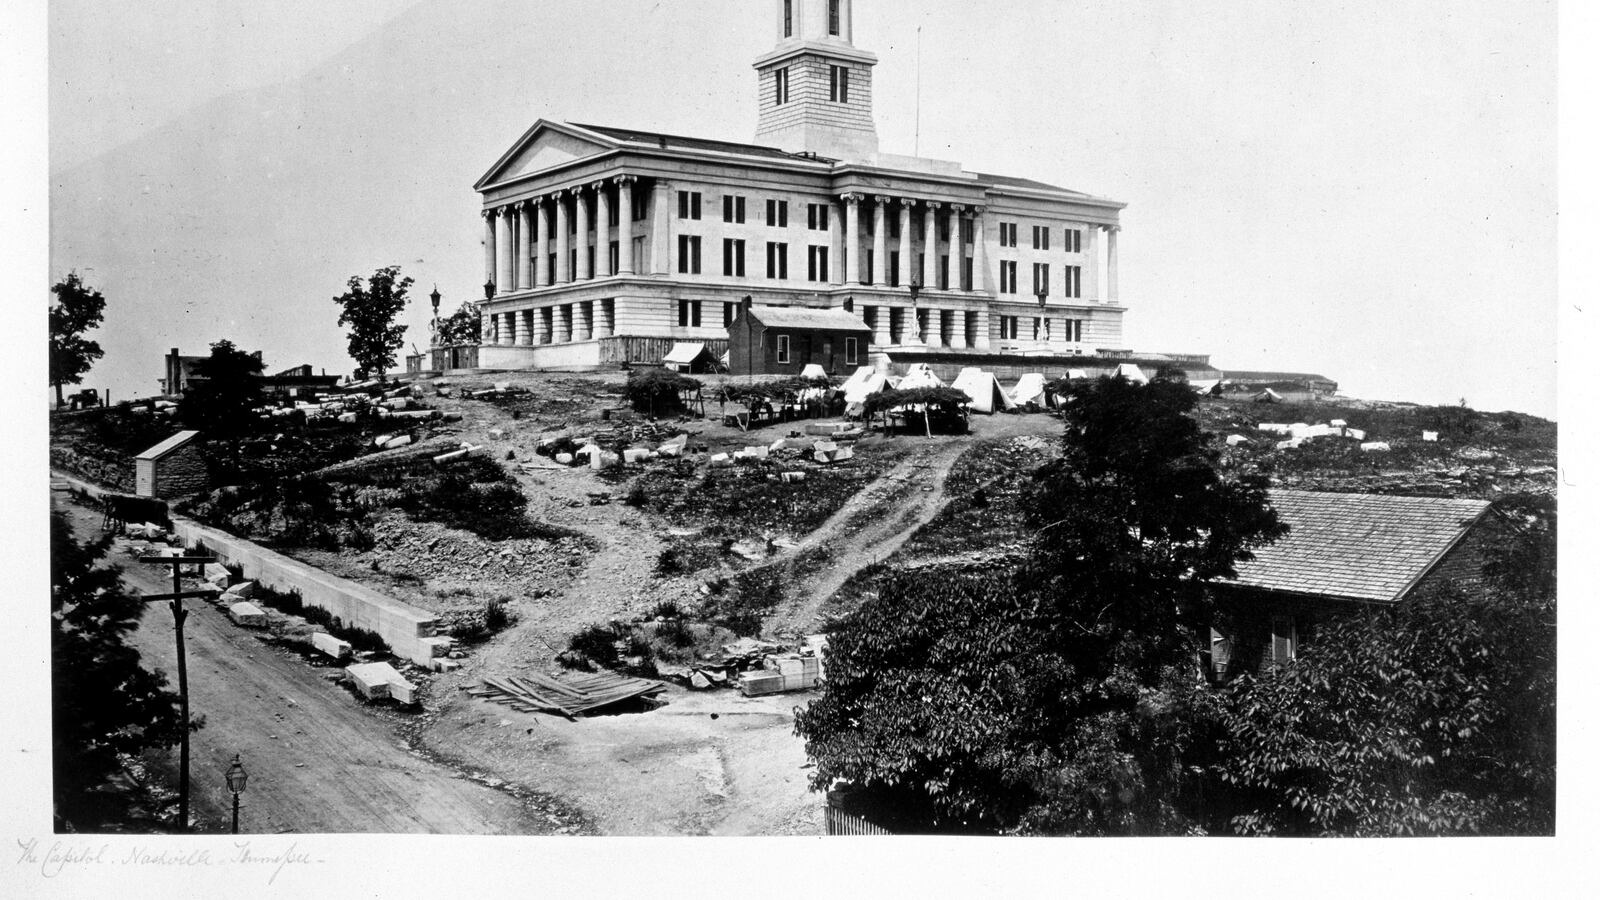 A historic black and white photograph of the Tennessee State Capitol in Nashville during the Civil War.